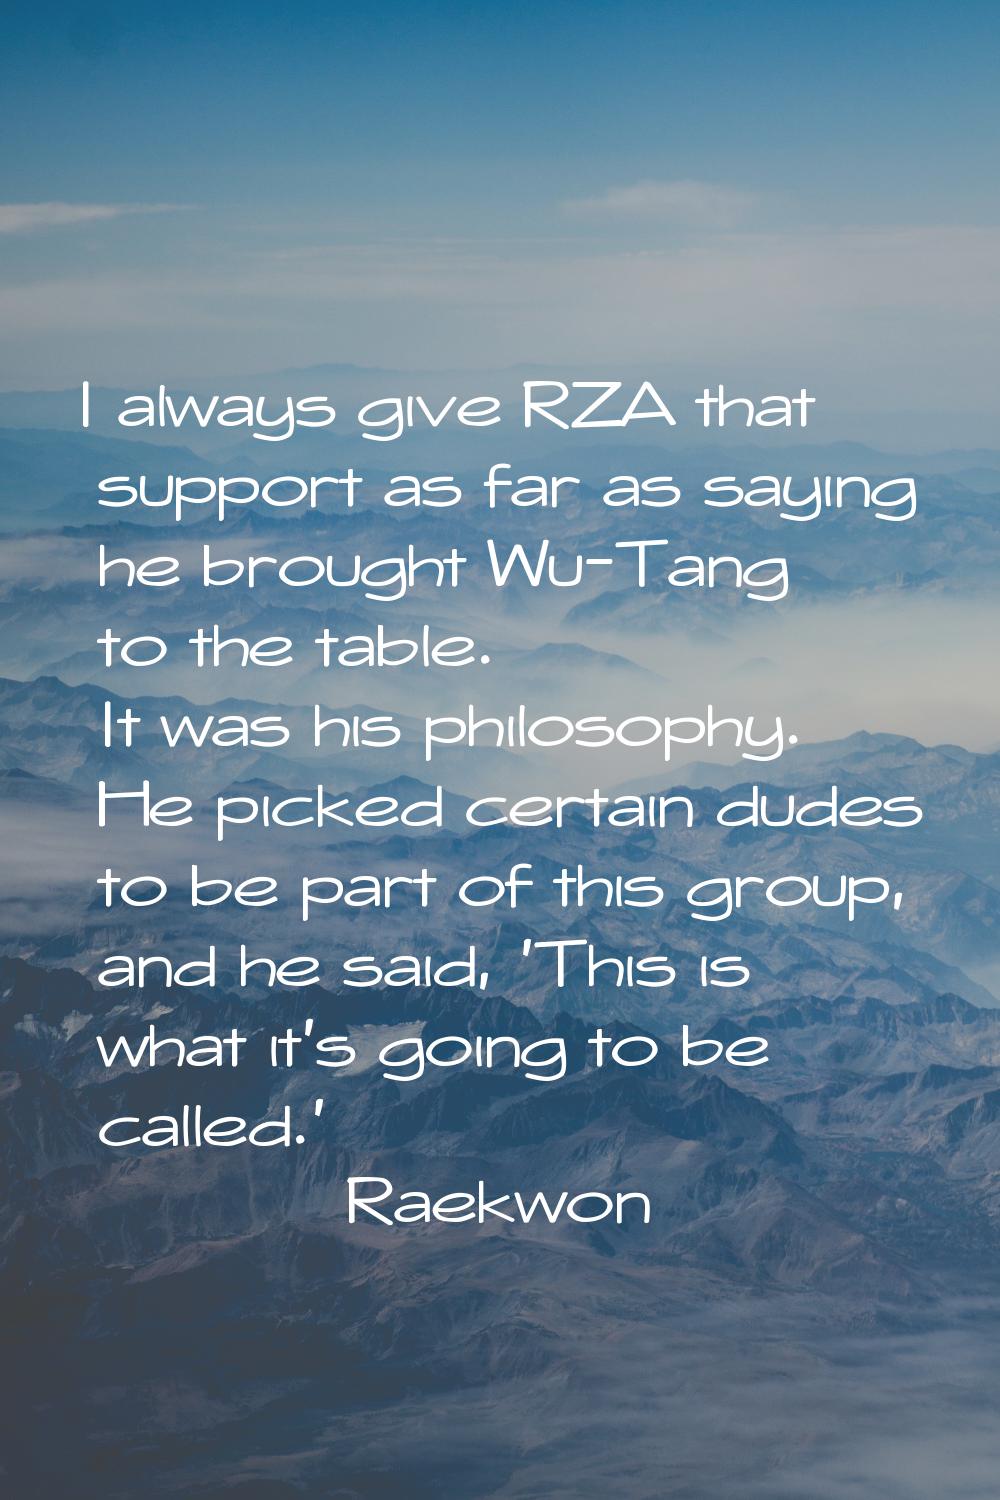 I always give RZA that support as far as saying he brought Wu-Tang to the table. It was his philoso